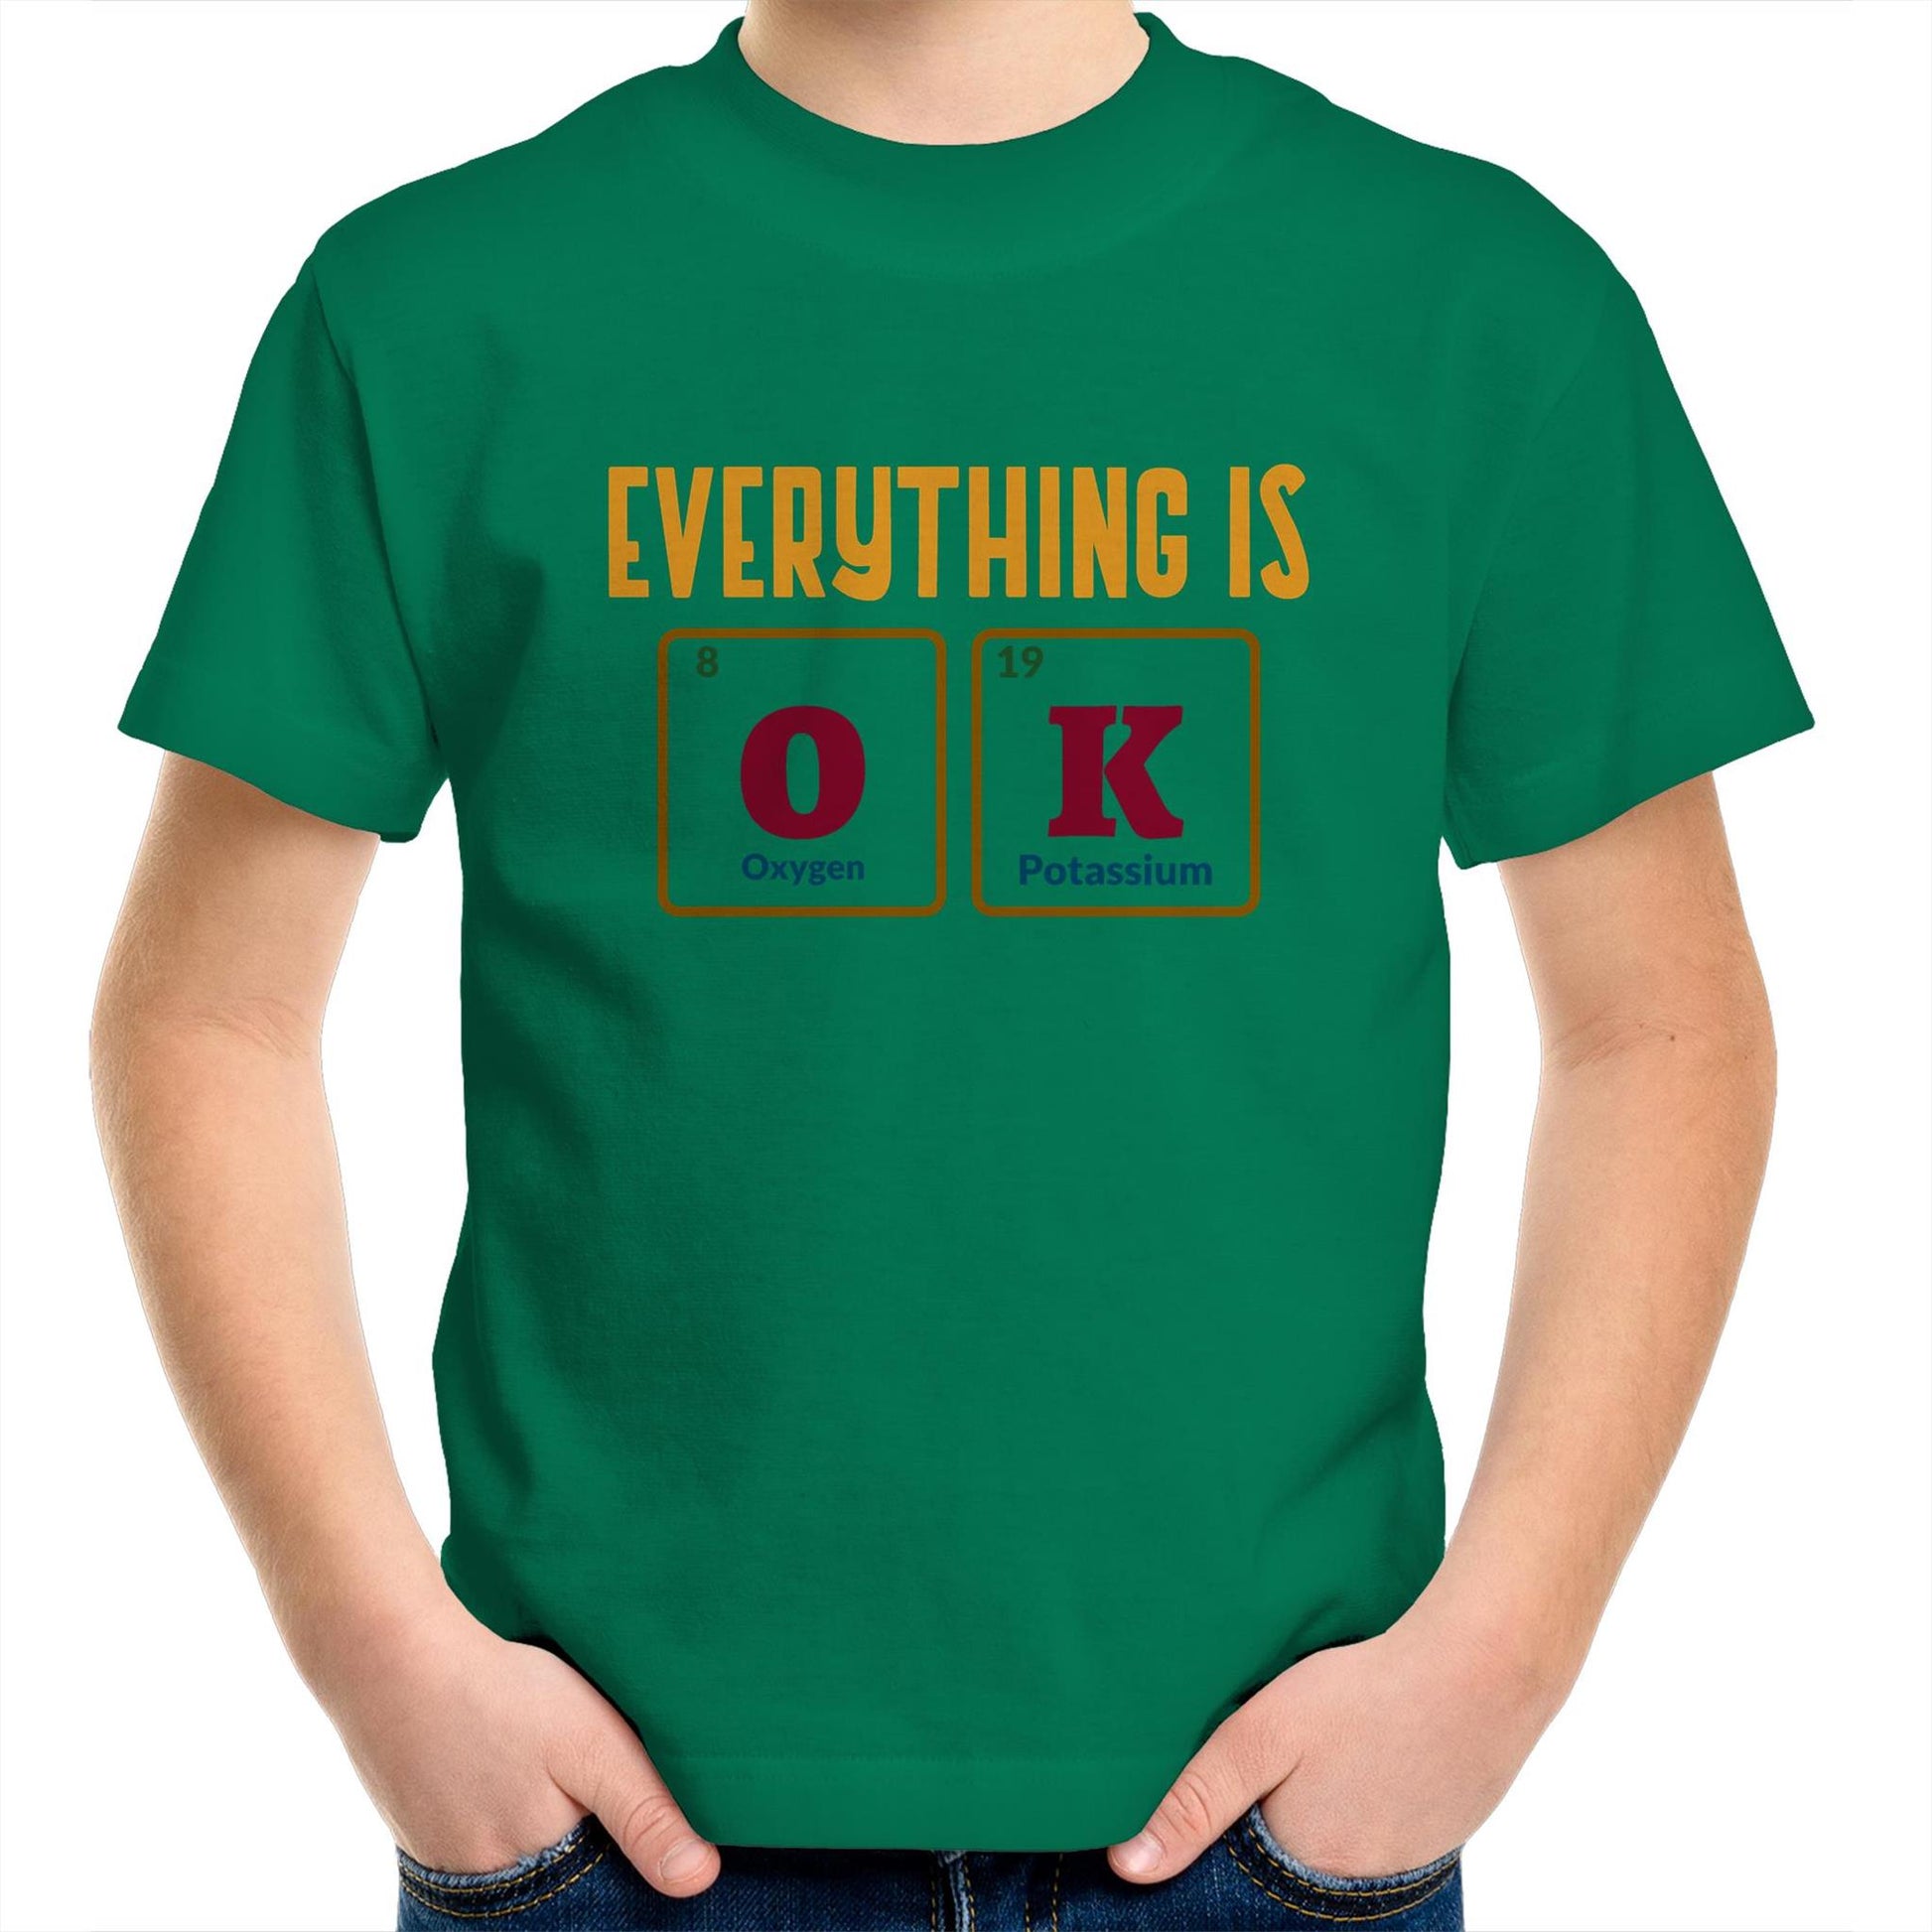 Everything Is OK, Periodic Table Of Elements - Kids Youth T-Shirt Kelly Green Kids Youth T-shirt Science